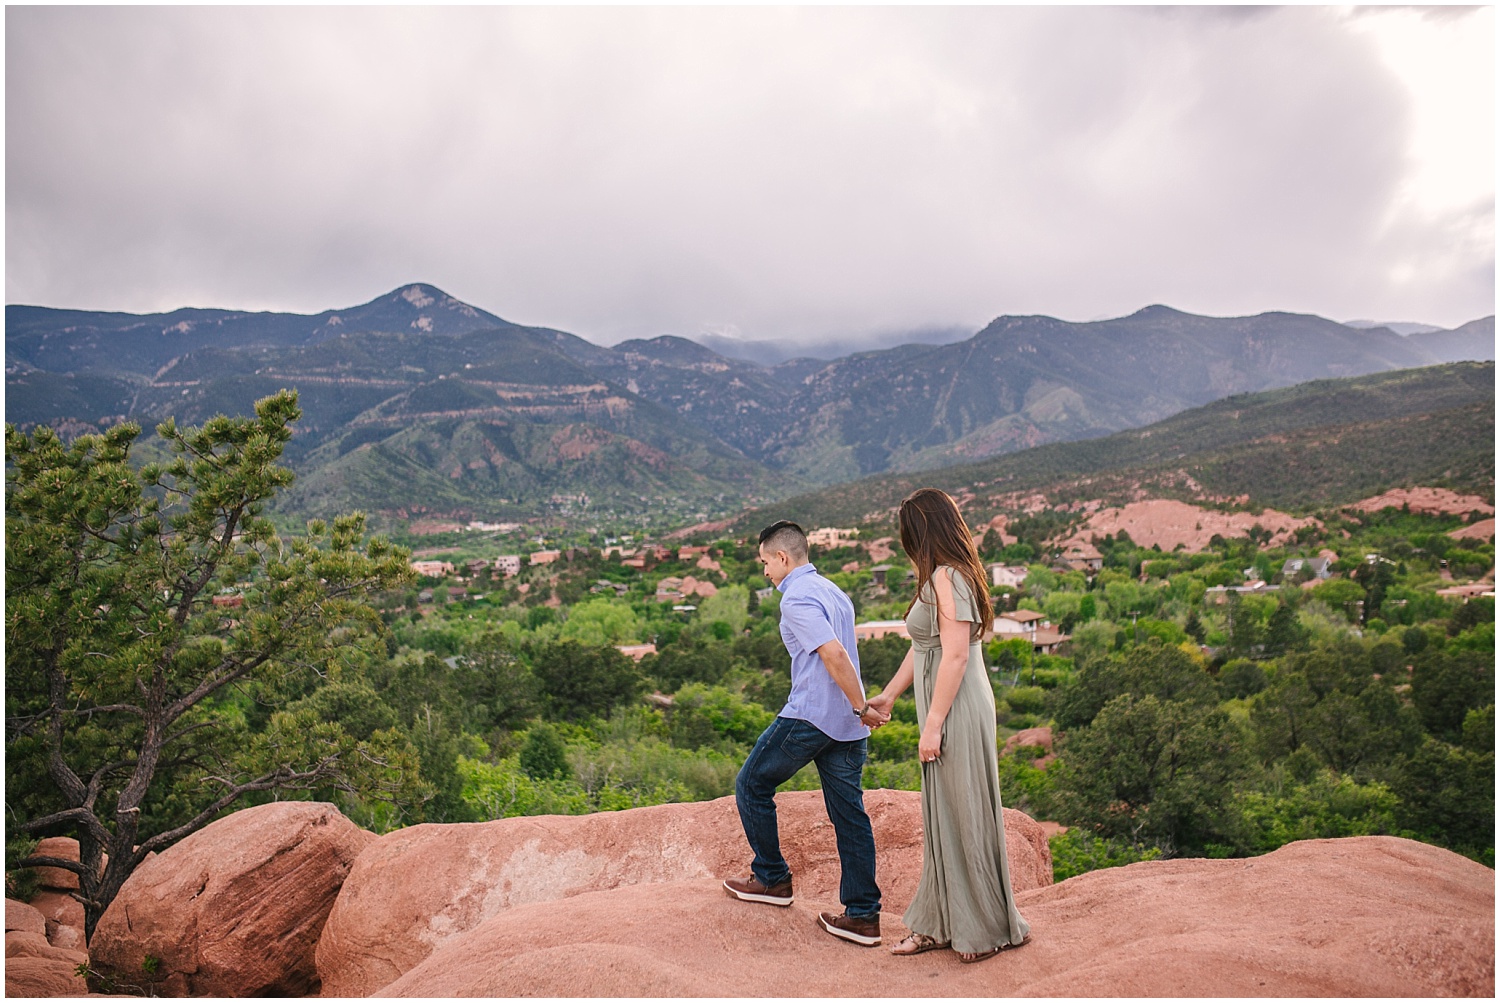 Couple walking across red rocks at Garden of the Gods in Colorado Springs